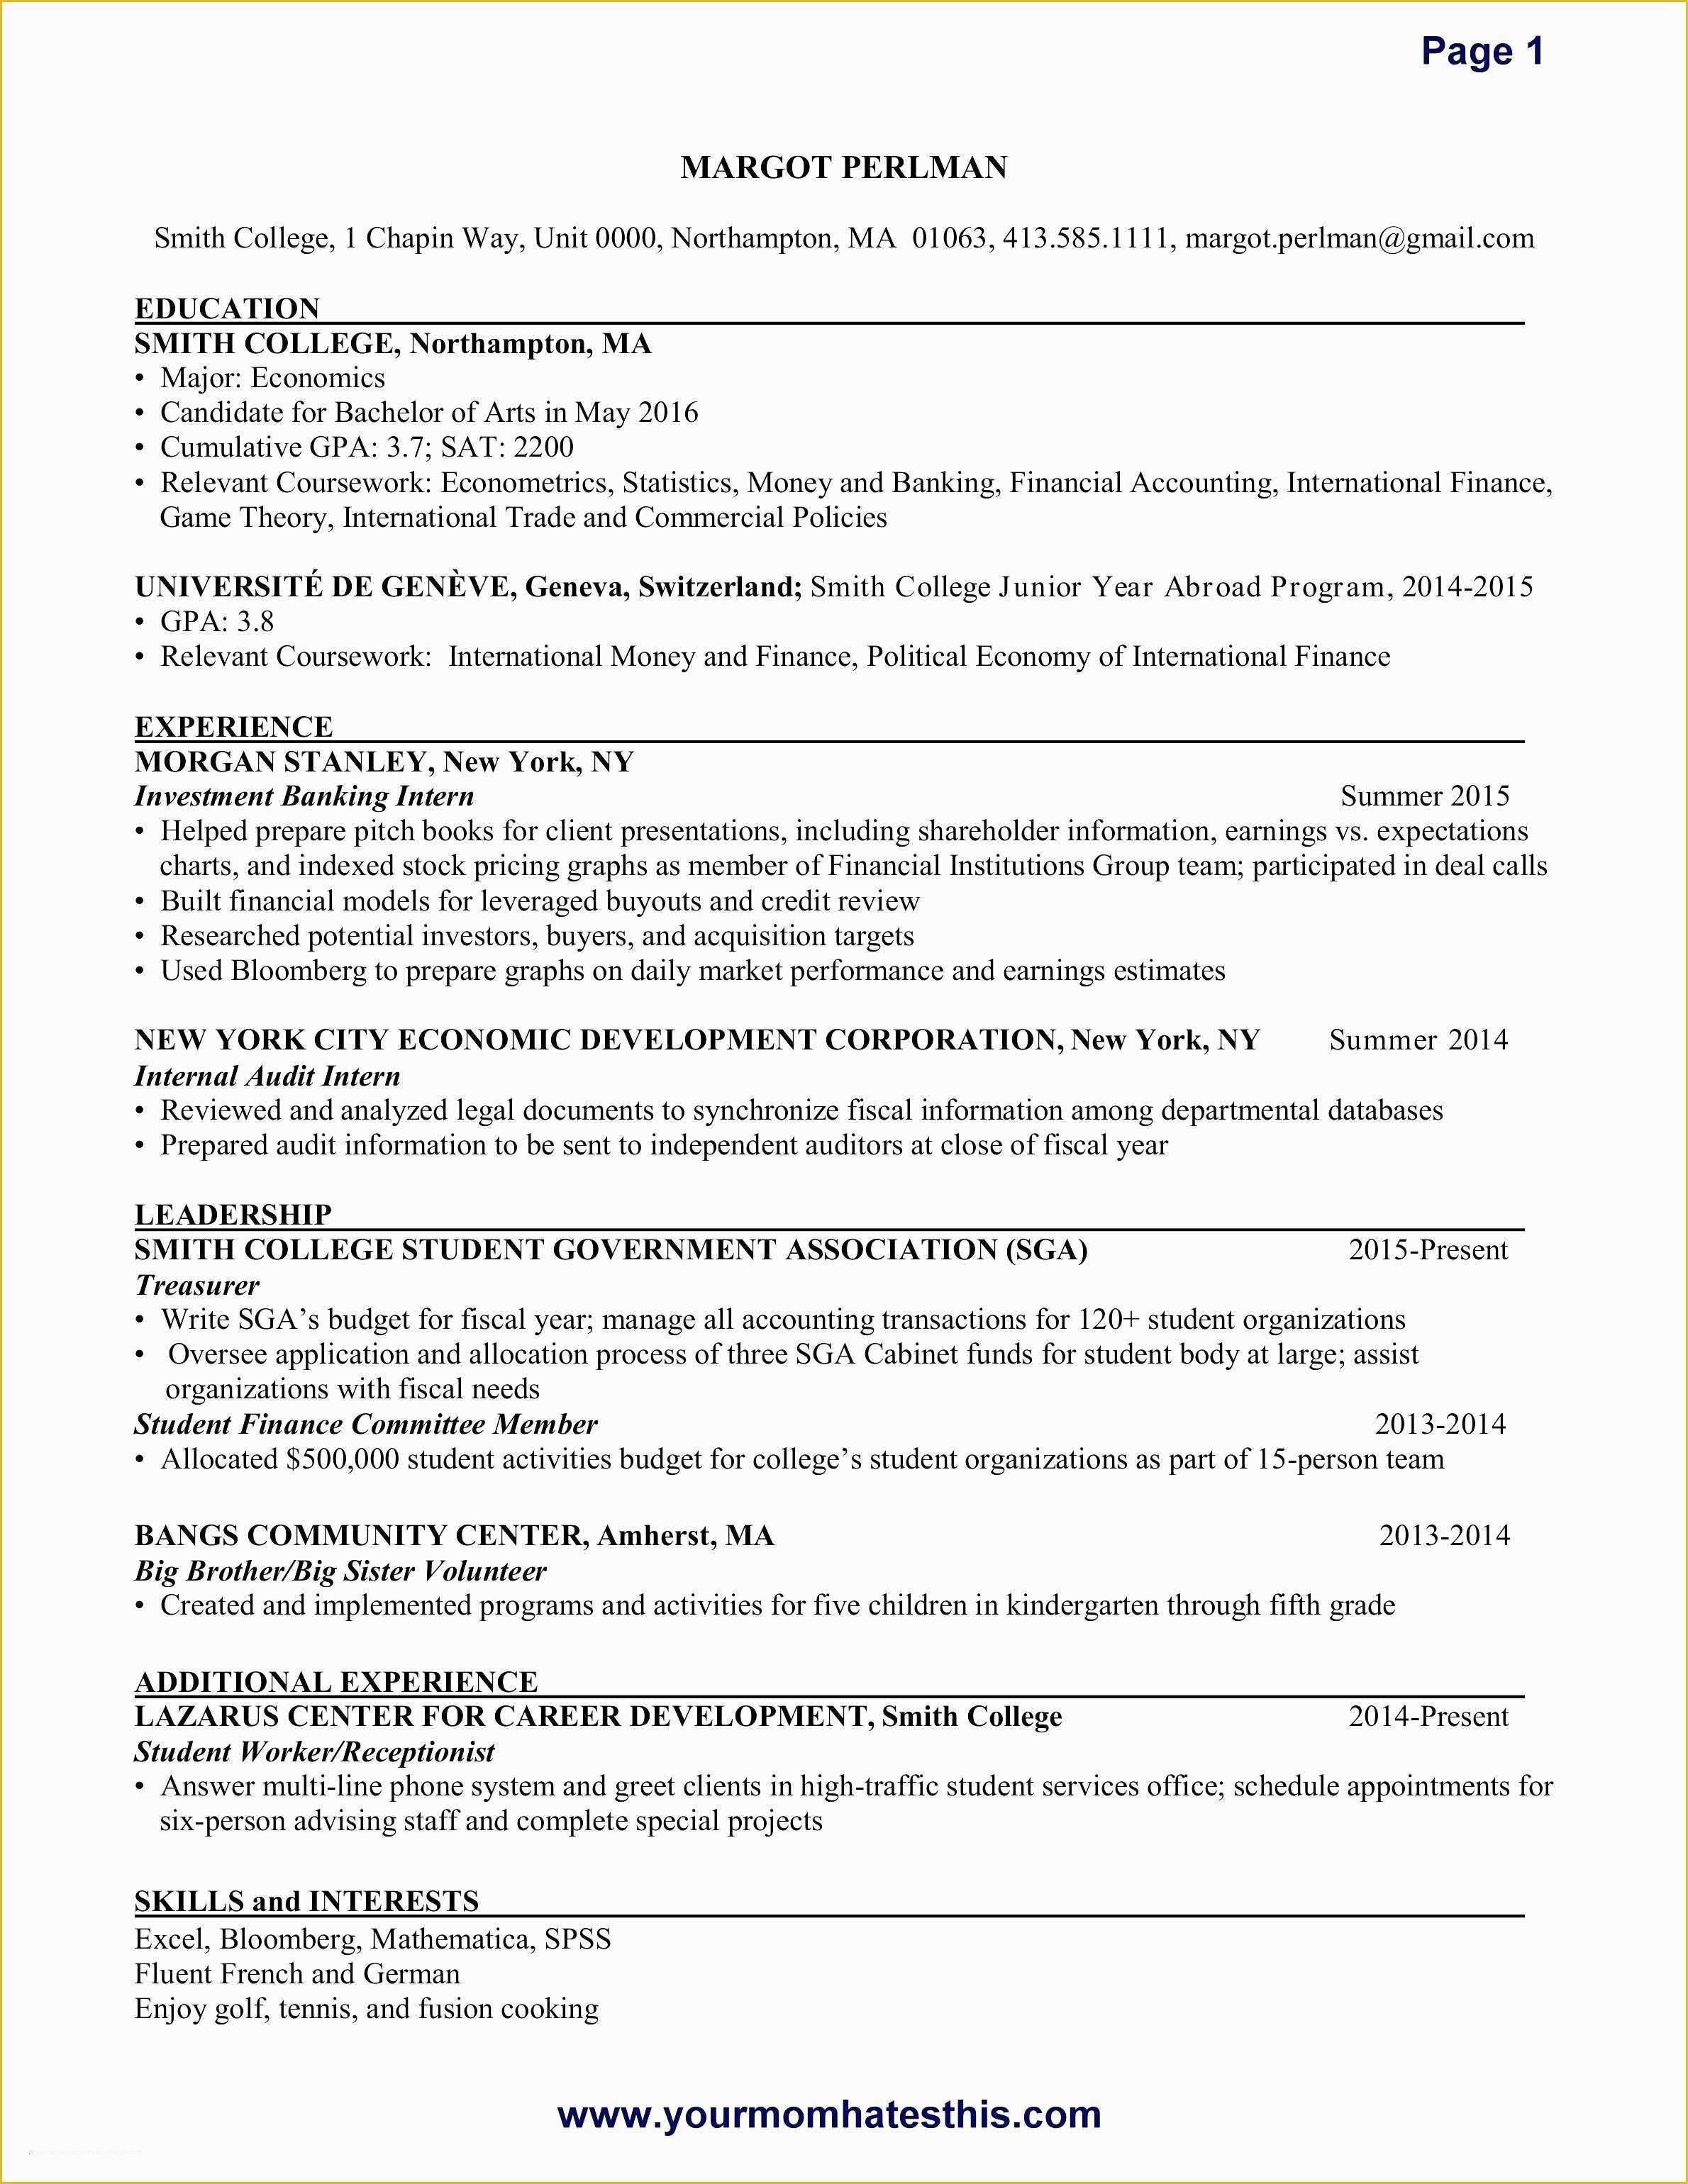 Free Windows Resume Templates Of top Resume Templates 2019 Free Download for Windows 10 1